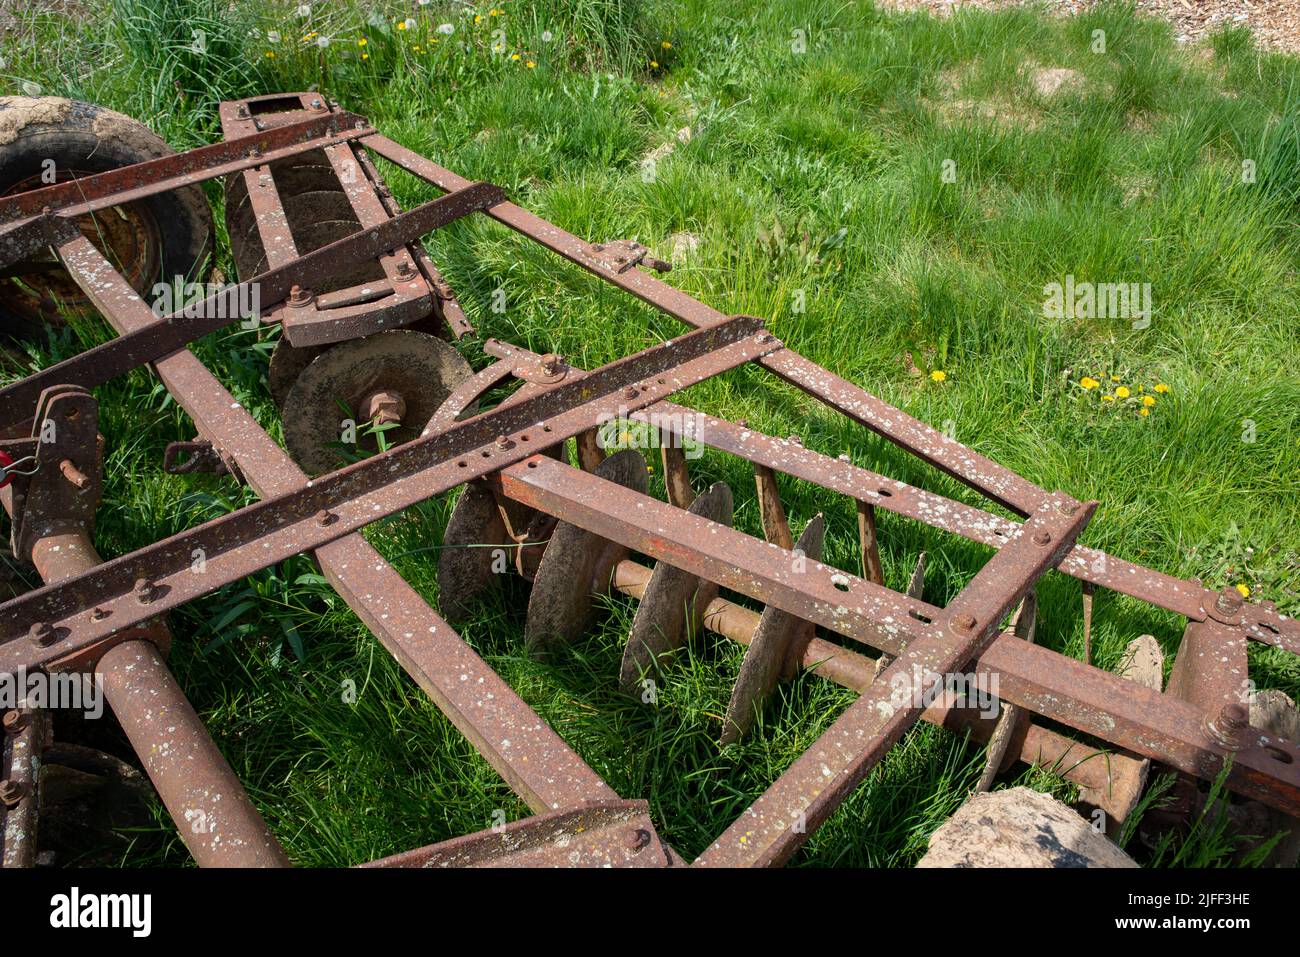 Antique disc harrow agricultural farm implement in green meadow Stock Photo